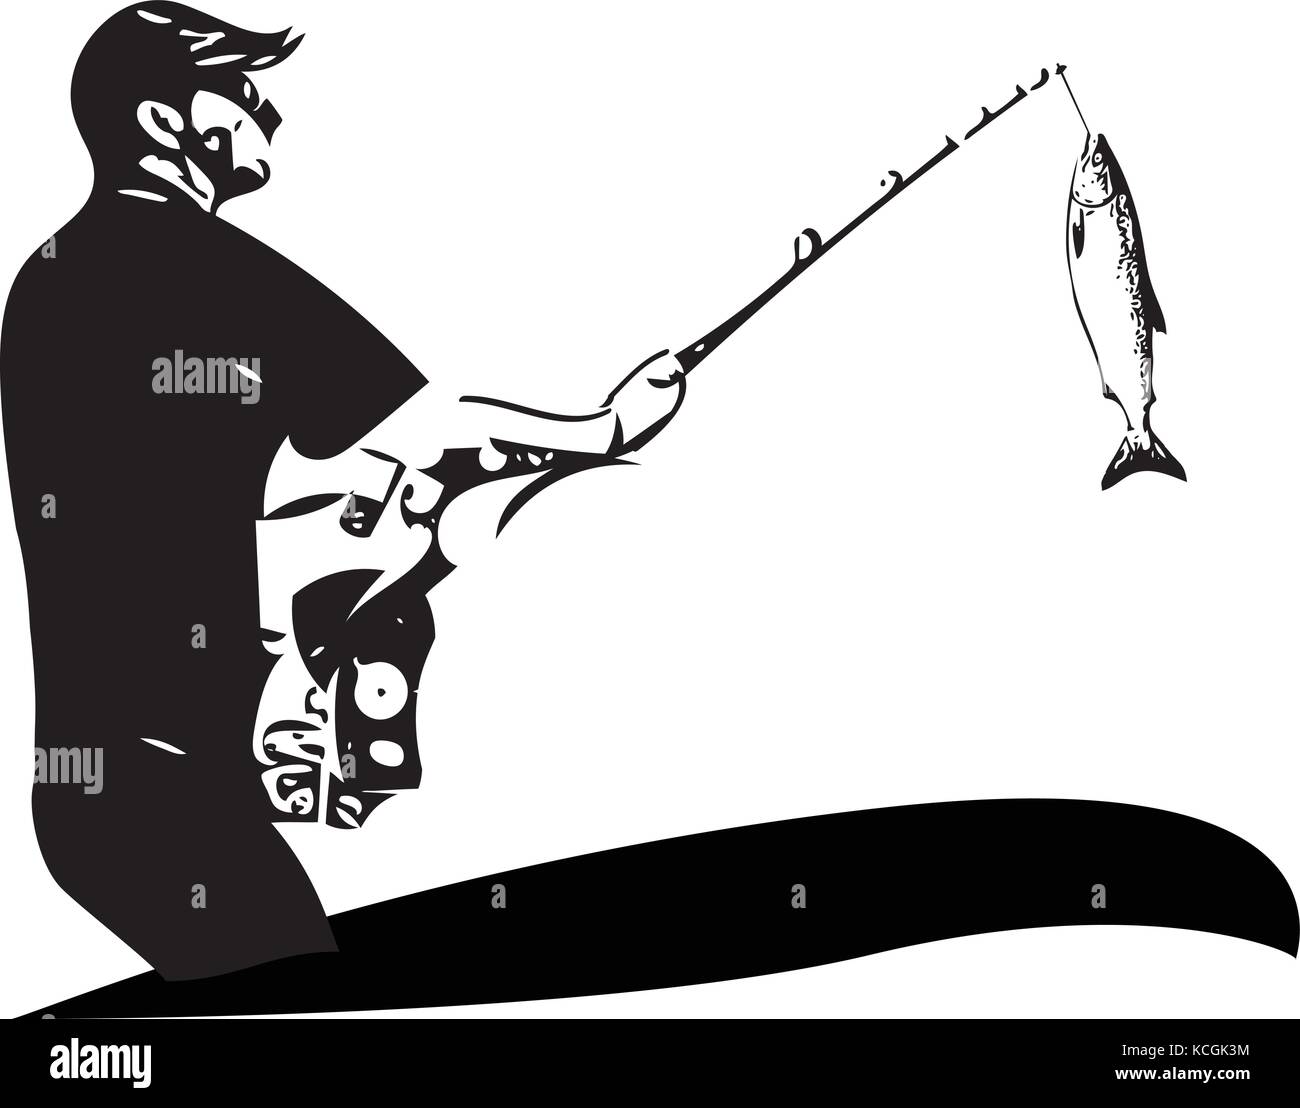 Illustration of man fishing from the boat Stock Vector